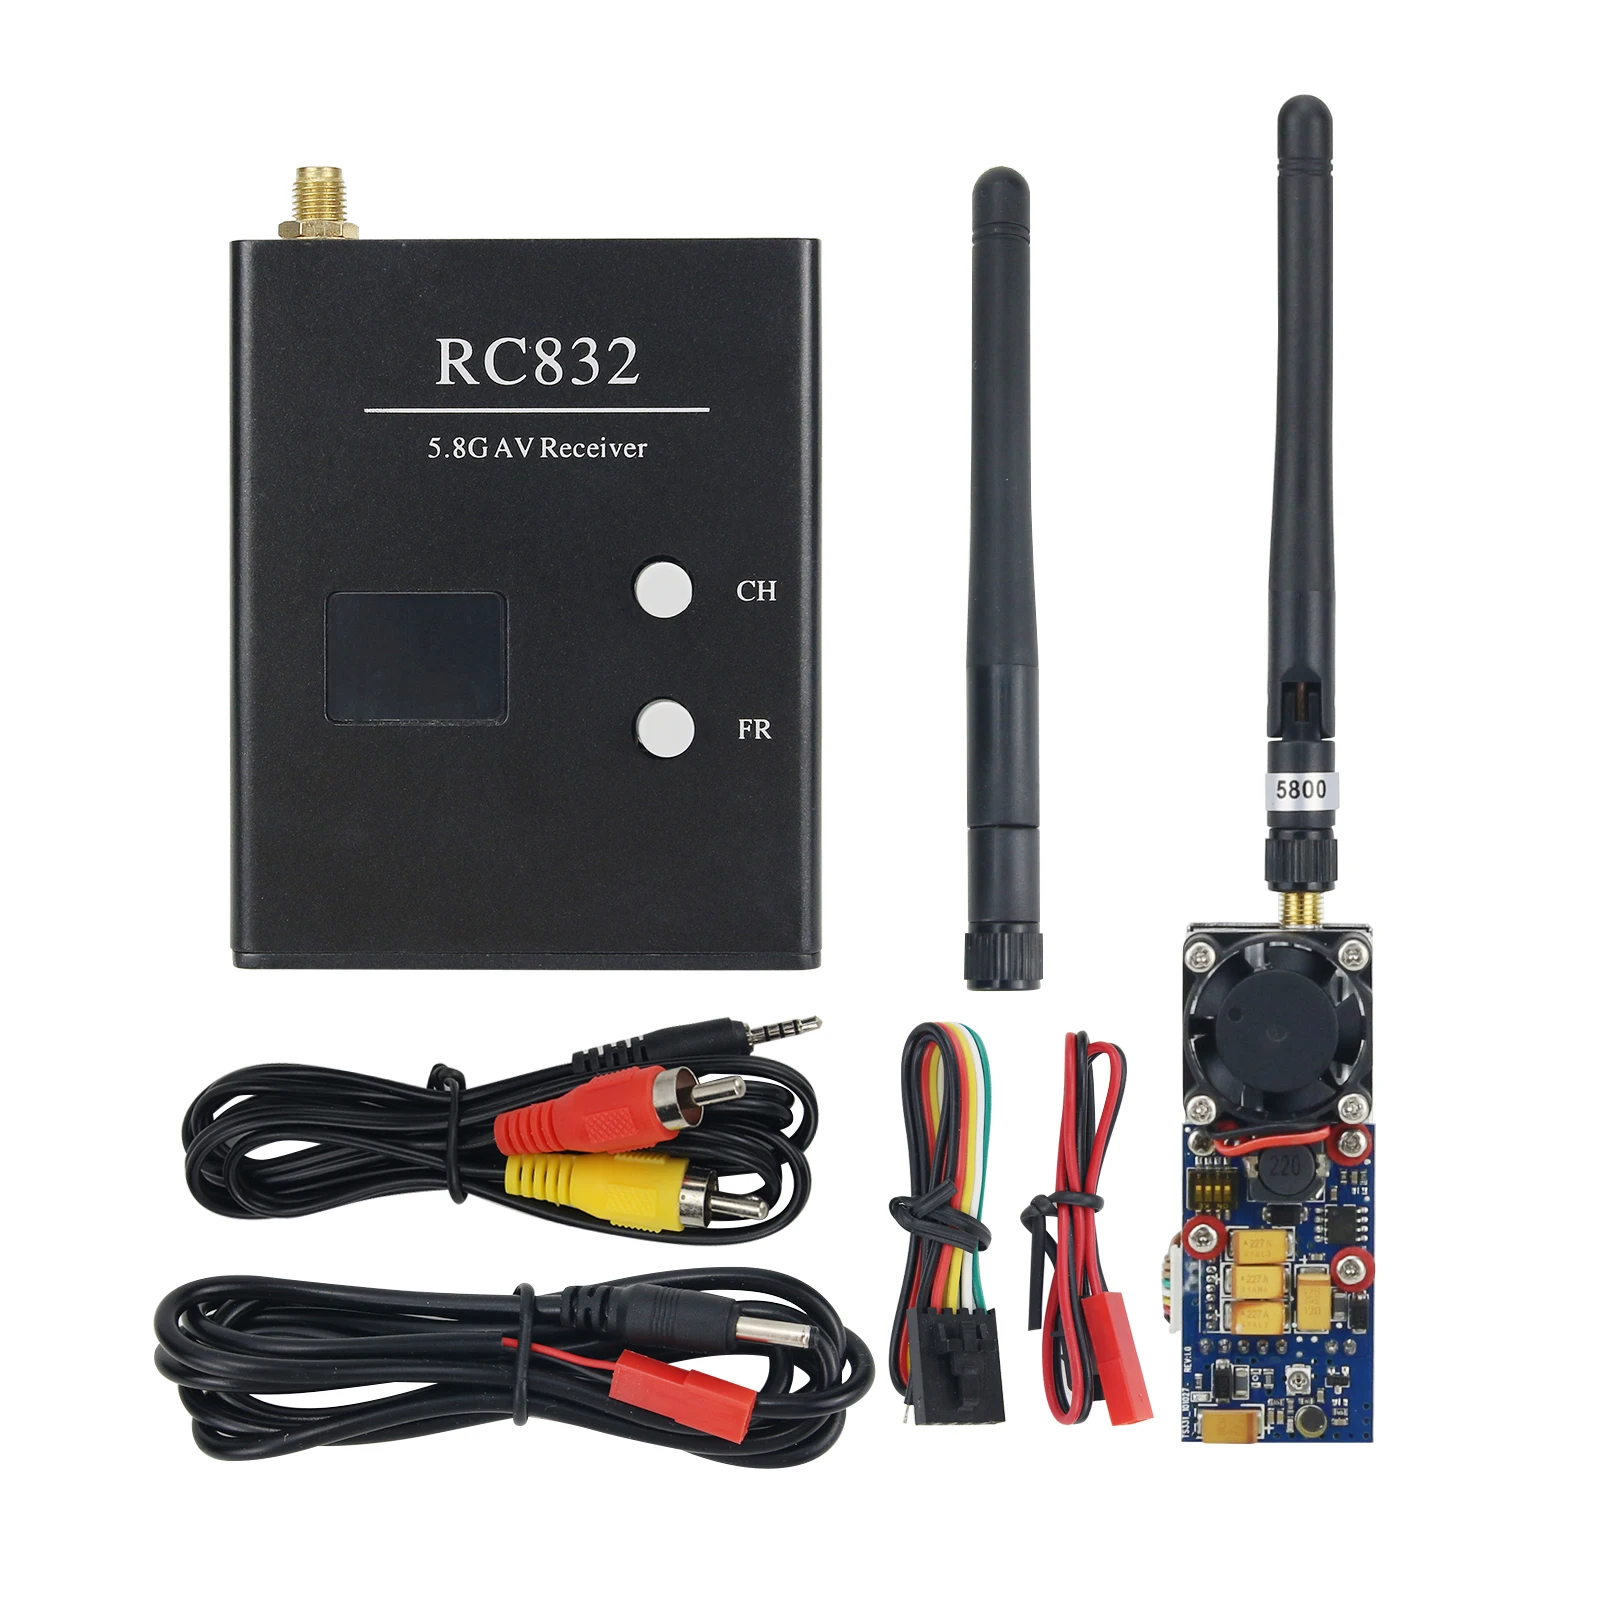 

RC Transmitter Receiver RC TX RX 5.8G 2000MW 8-Channel Wireless Transmitter & RC832 5.8G AV Receiver for FPV